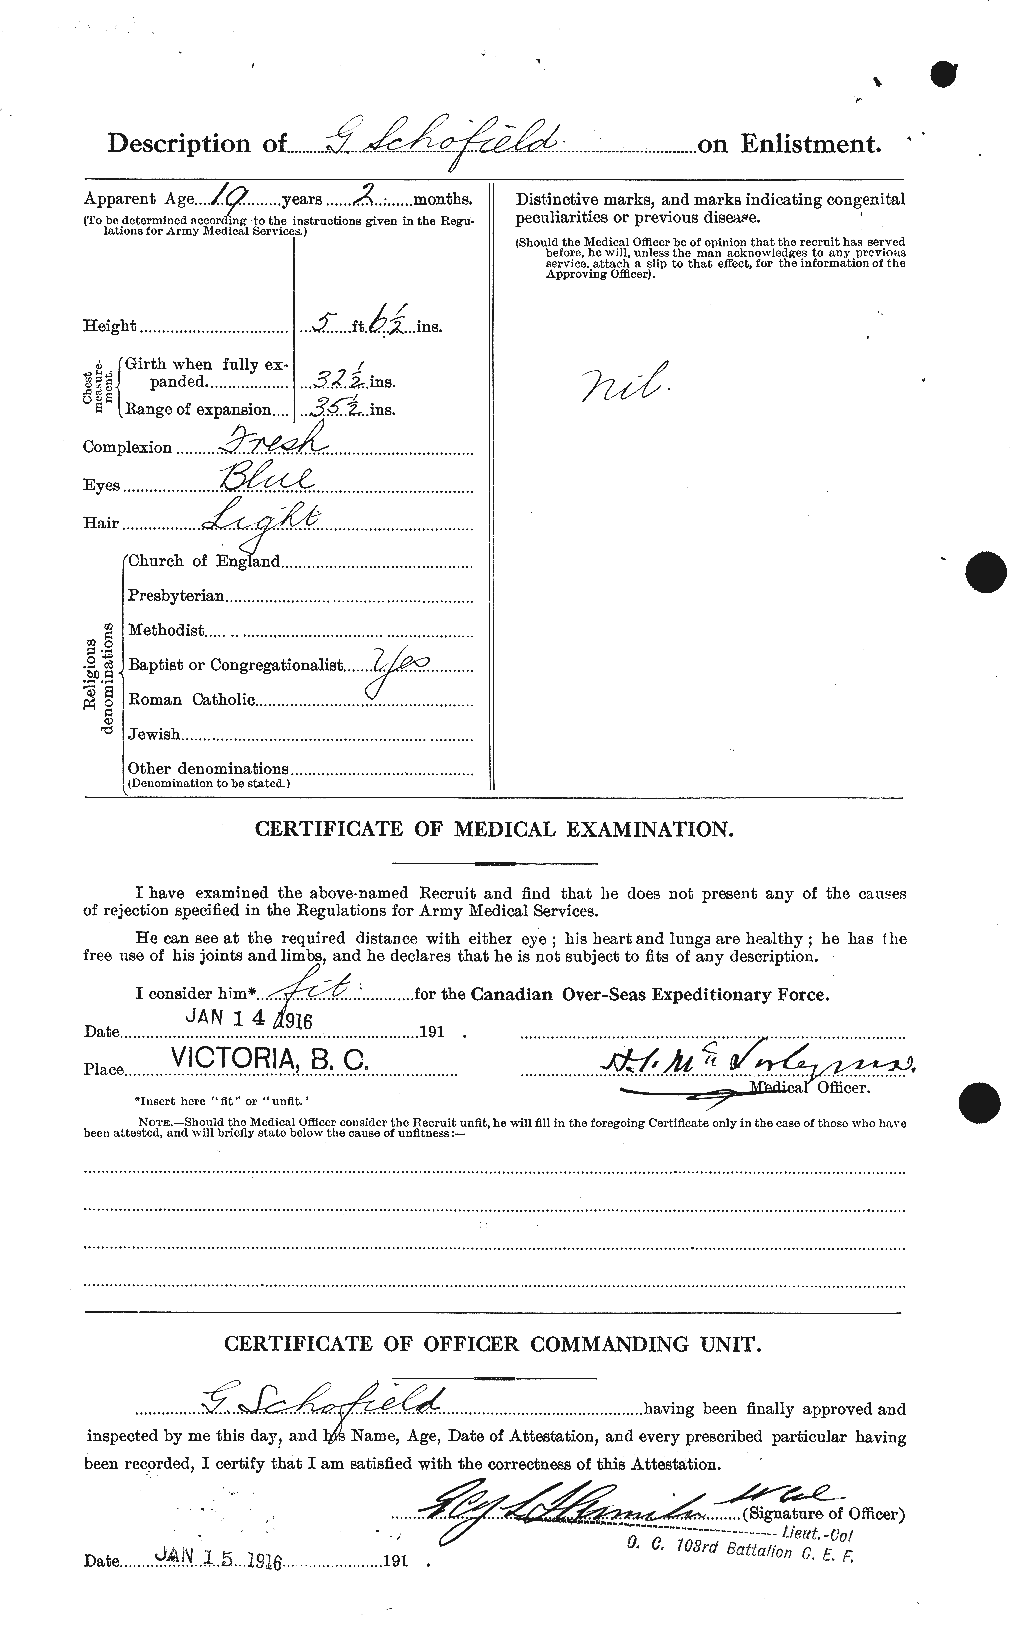 Personnel Records of the First World War - CEF 082190b